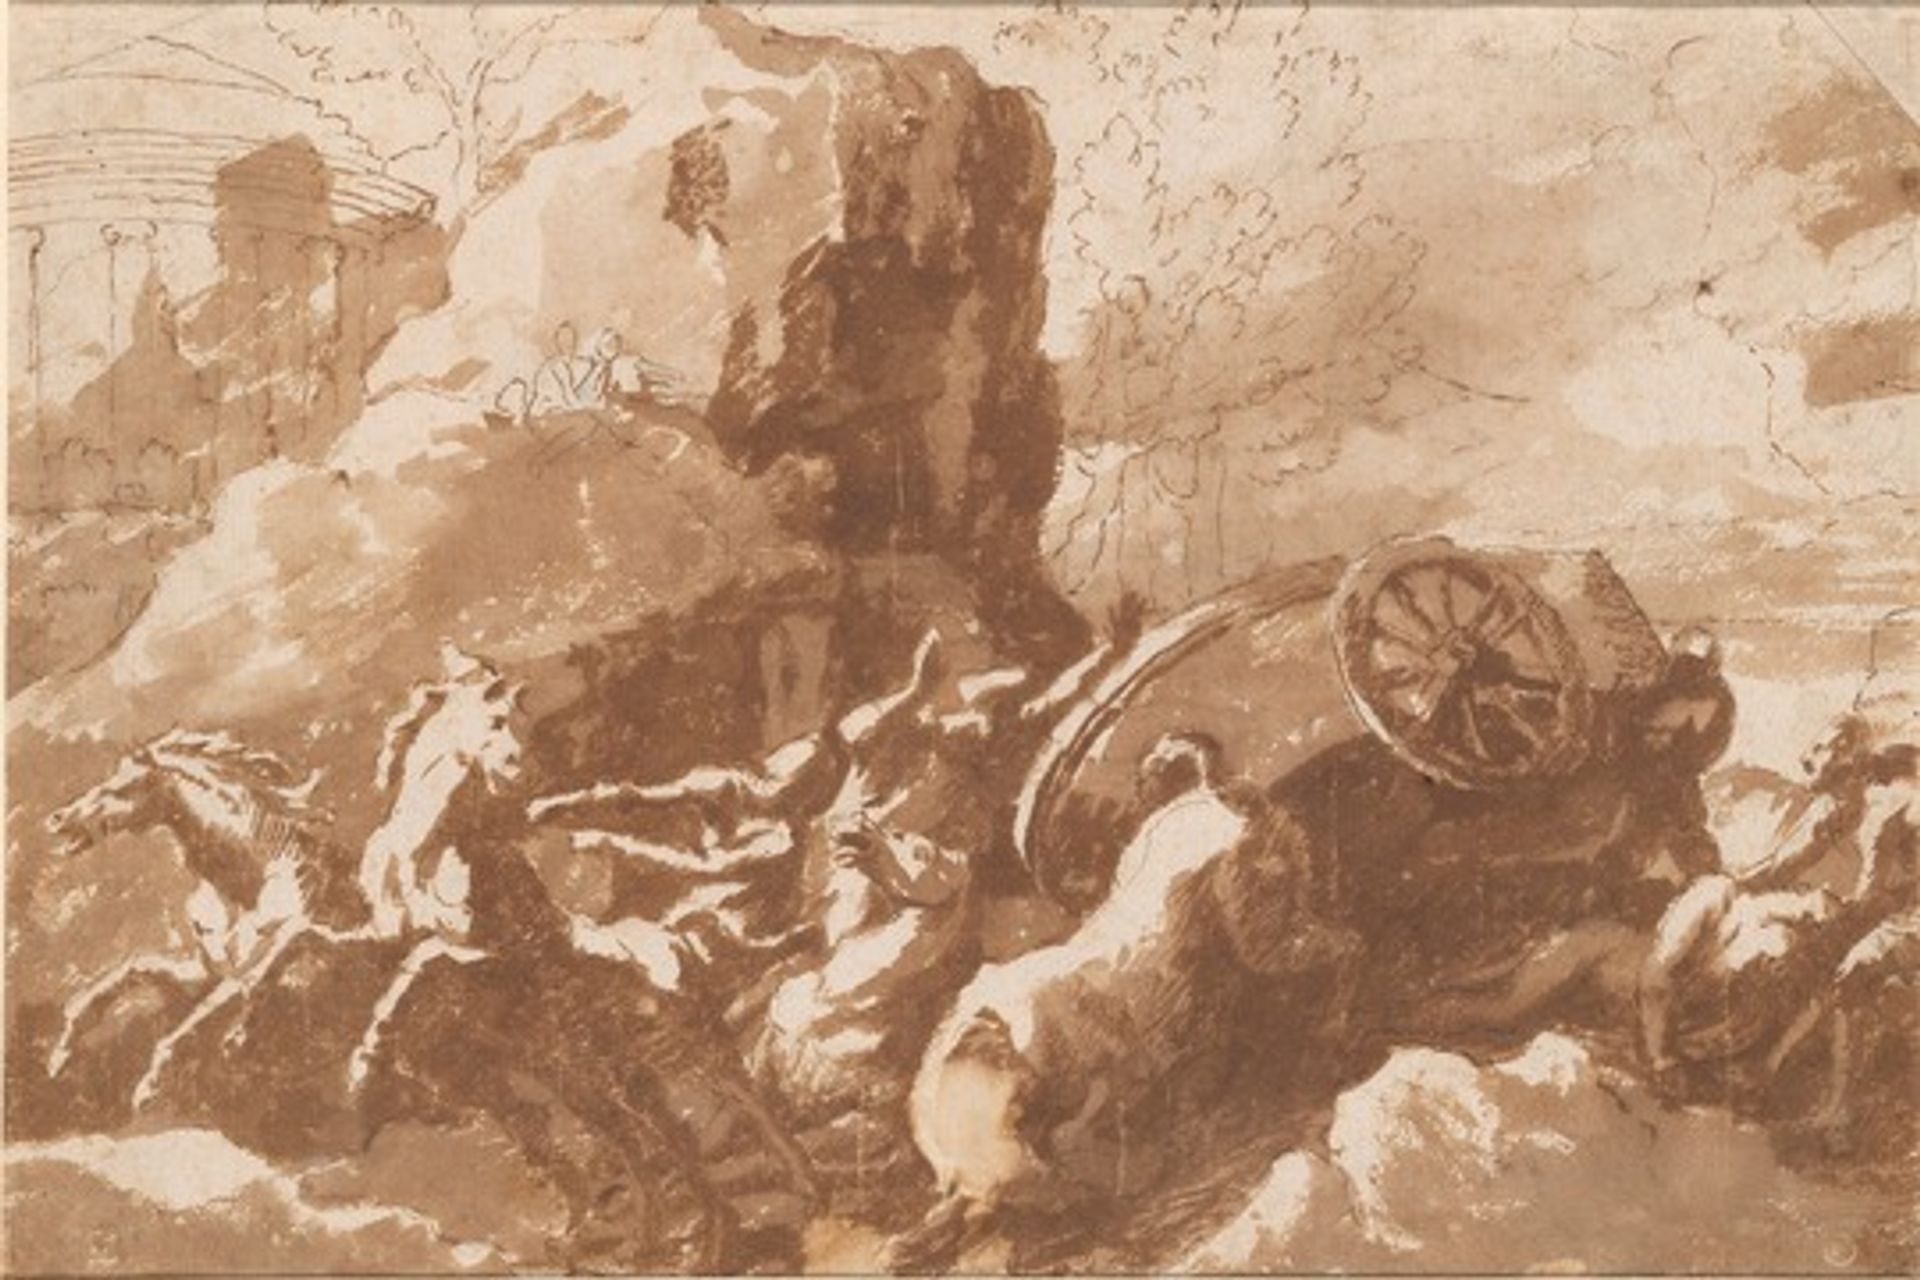 Poussin’s pen-and-ink work Death of Hippolytus (1645) (The Morgan Library & Museum)